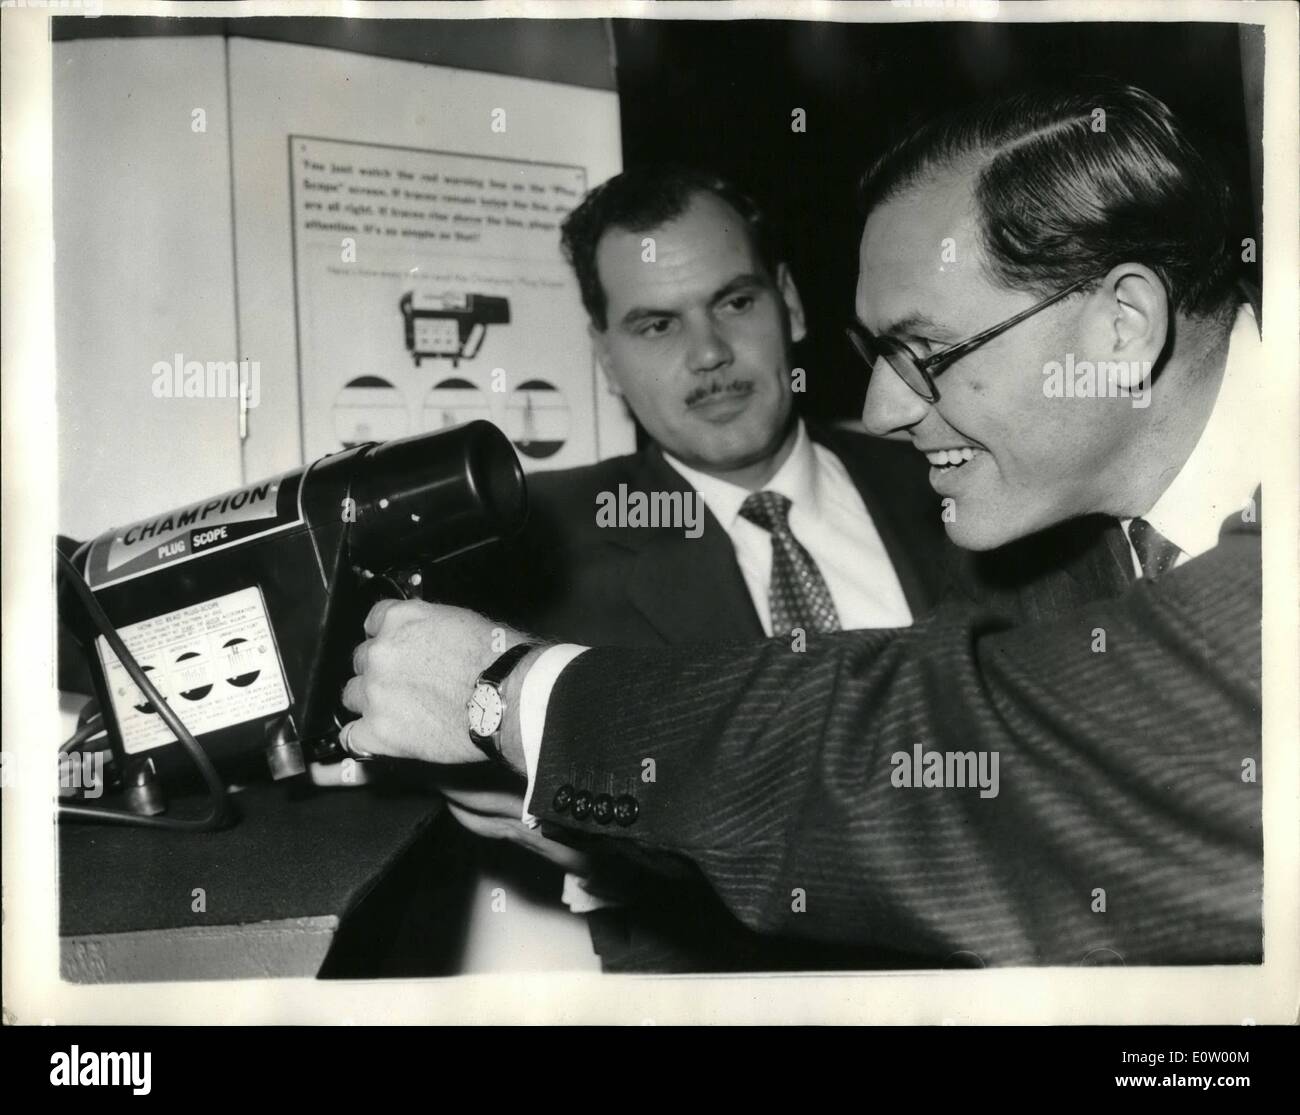 Oct. 10, 1960 - Opening of the Motor Show Electronic TV Sparkplug Tester; The Motor Show was opened this morning at Earls Court Stock Photo